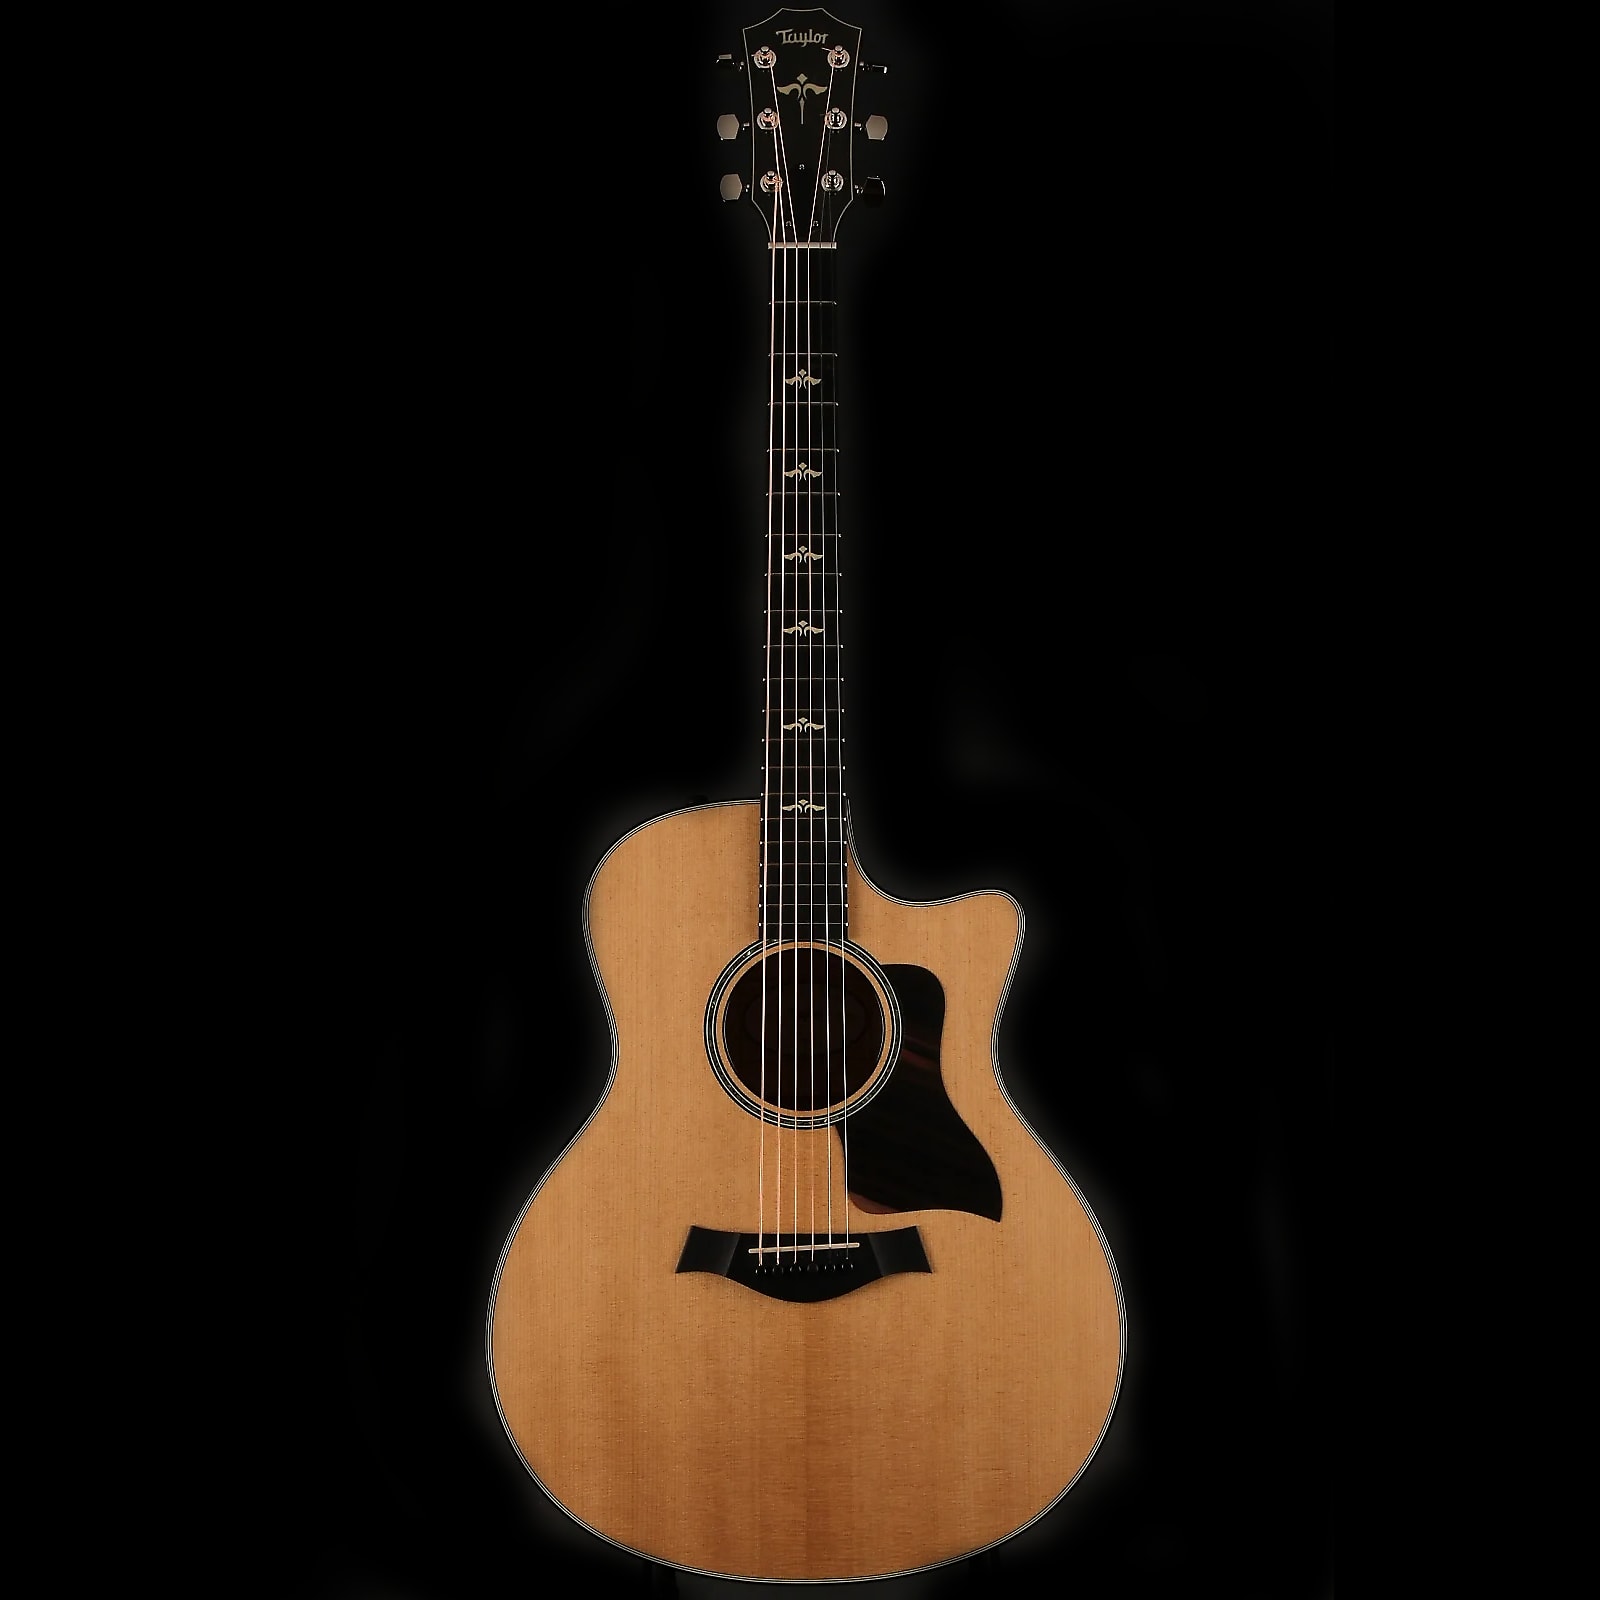 Taylor 616ce with ES1 Electronics | Reverb